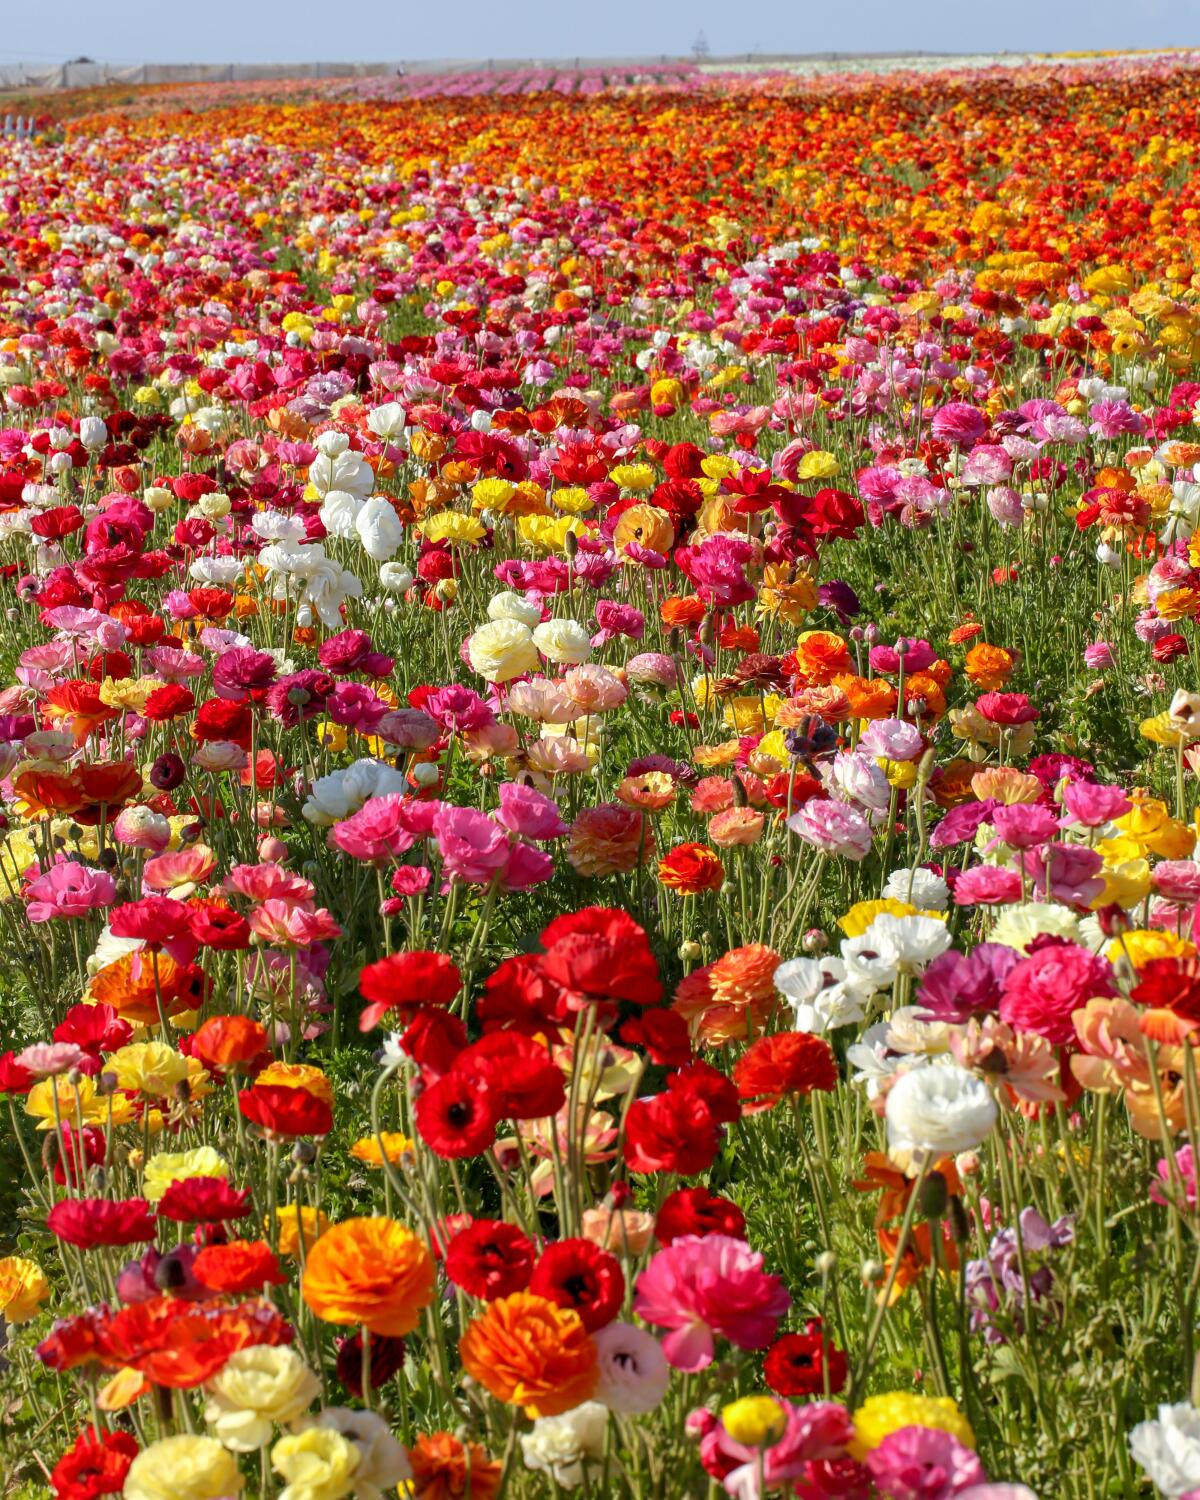 A field bursting with colorful flowers.